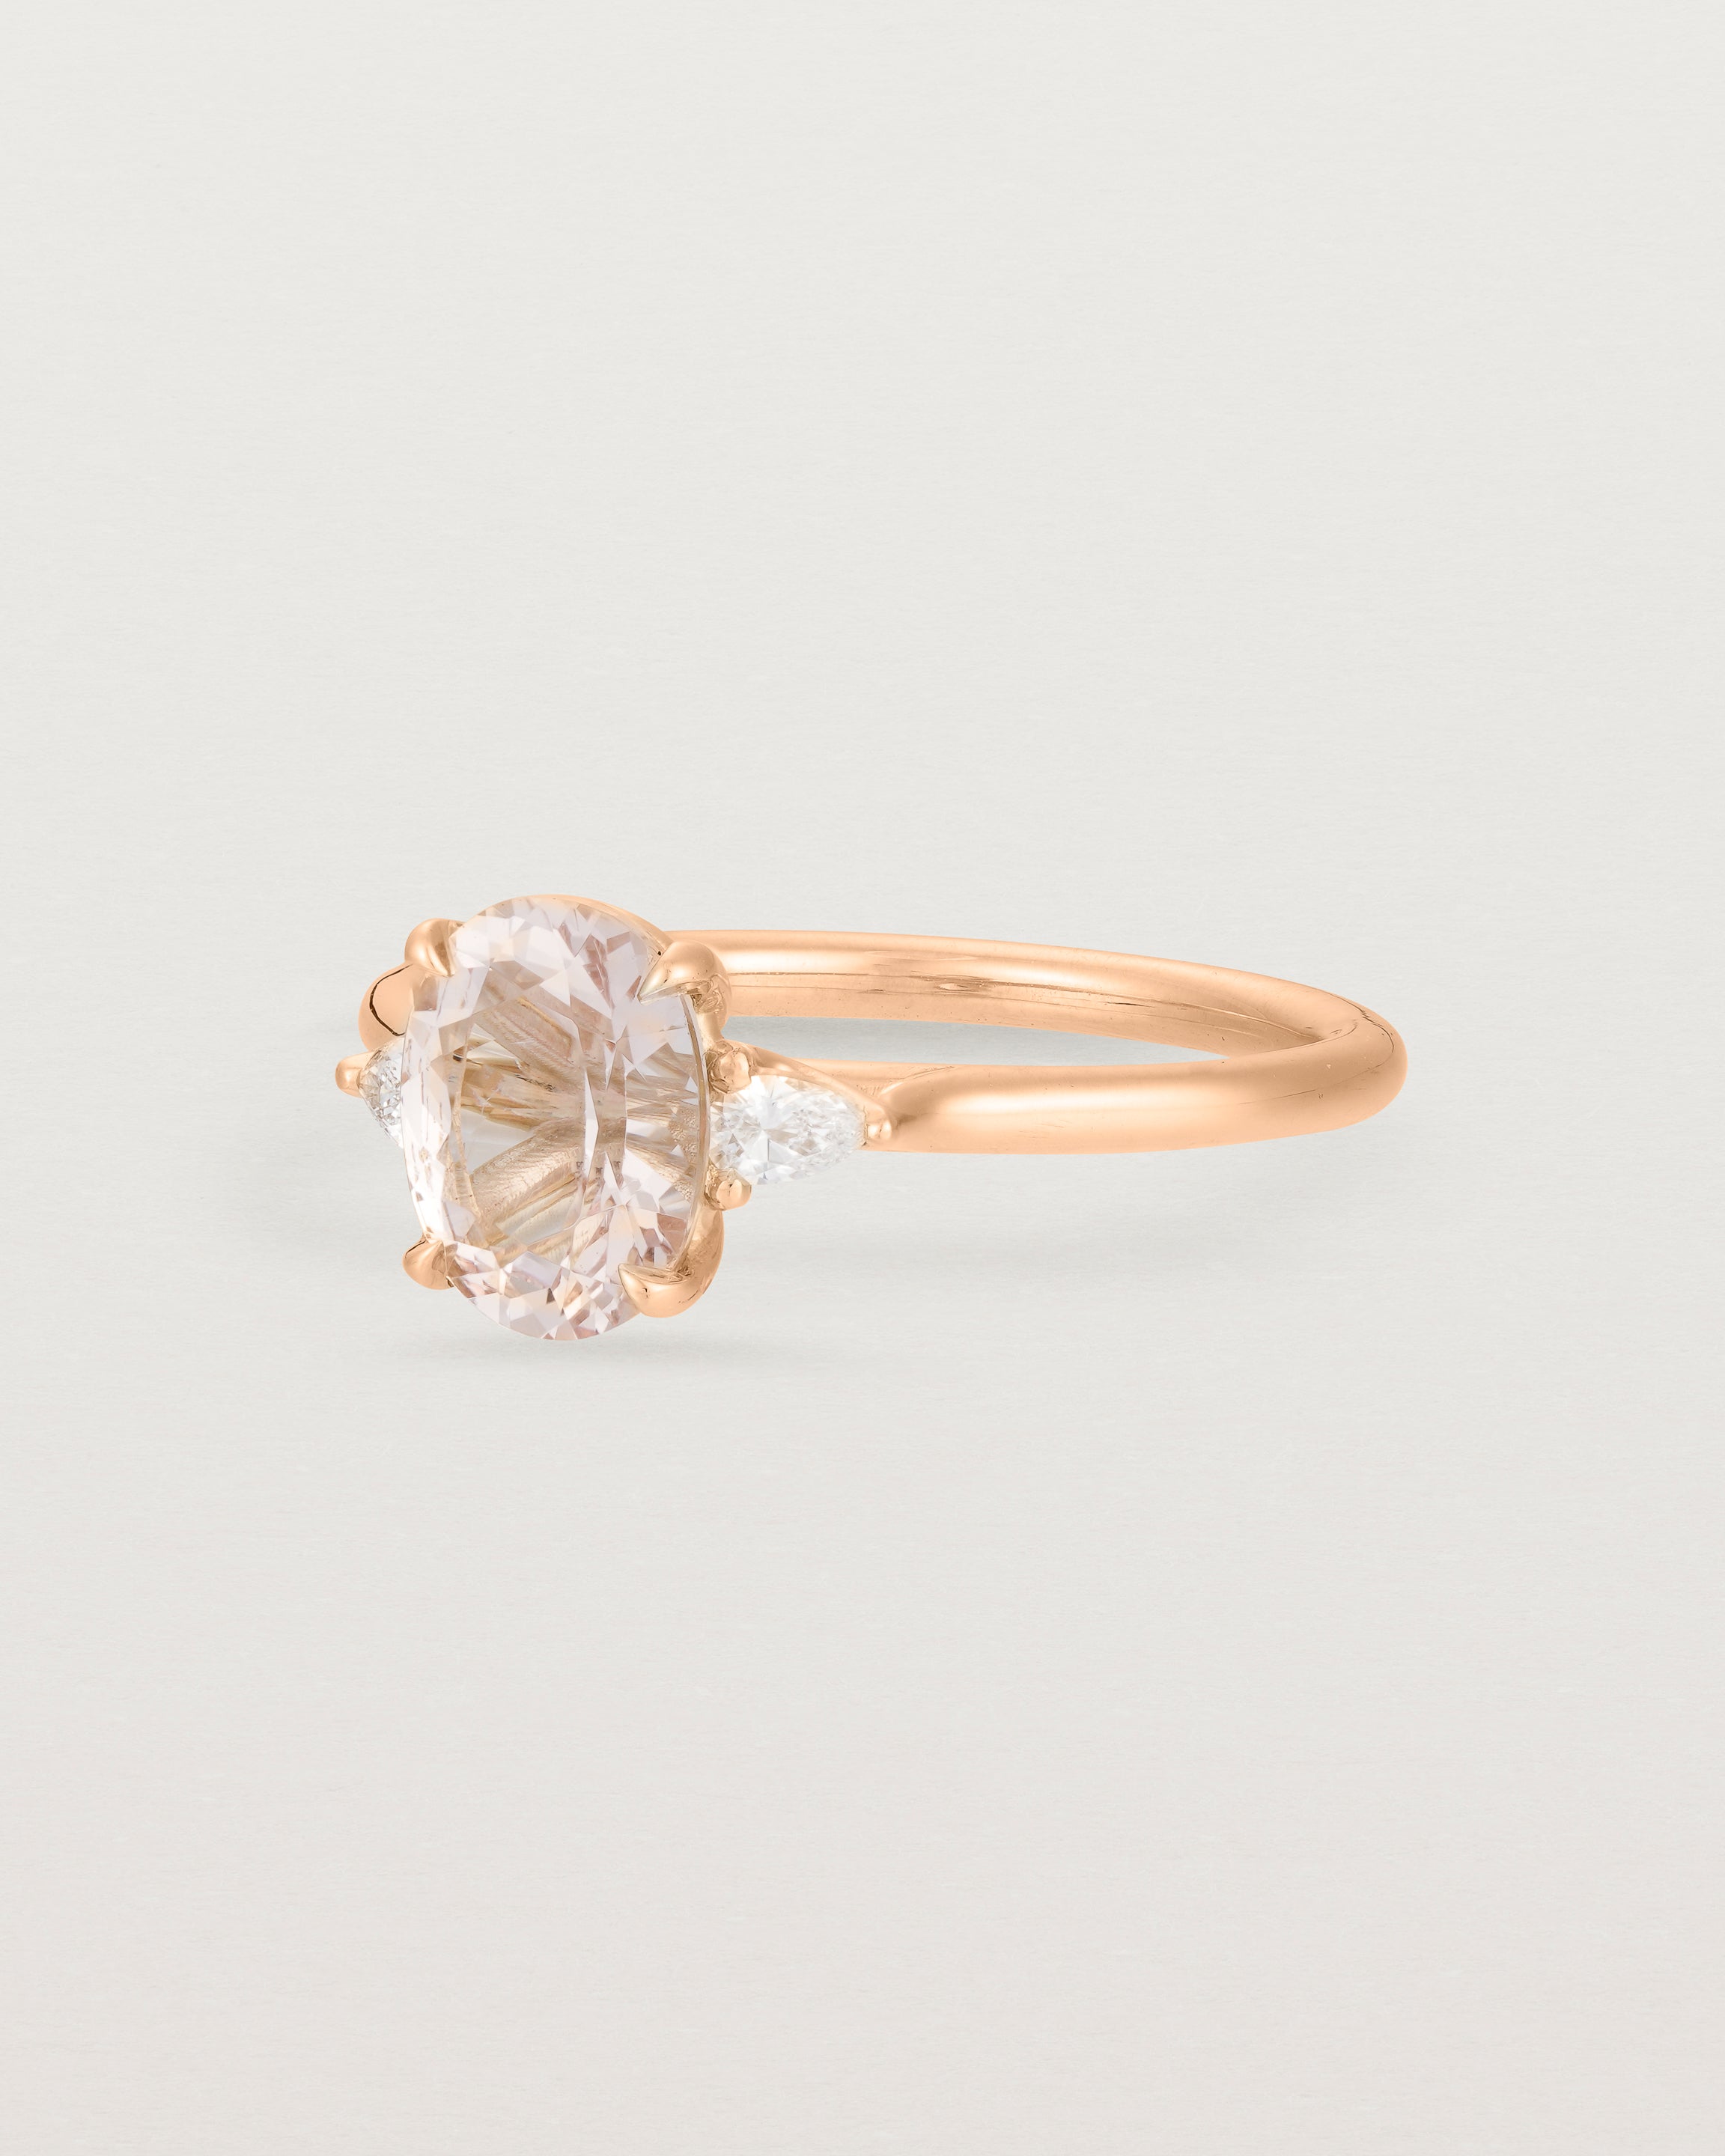 Side view of an Oval morganite adorned with white diamonds on either side, featuring a sweeping setting and crafted in rose gold